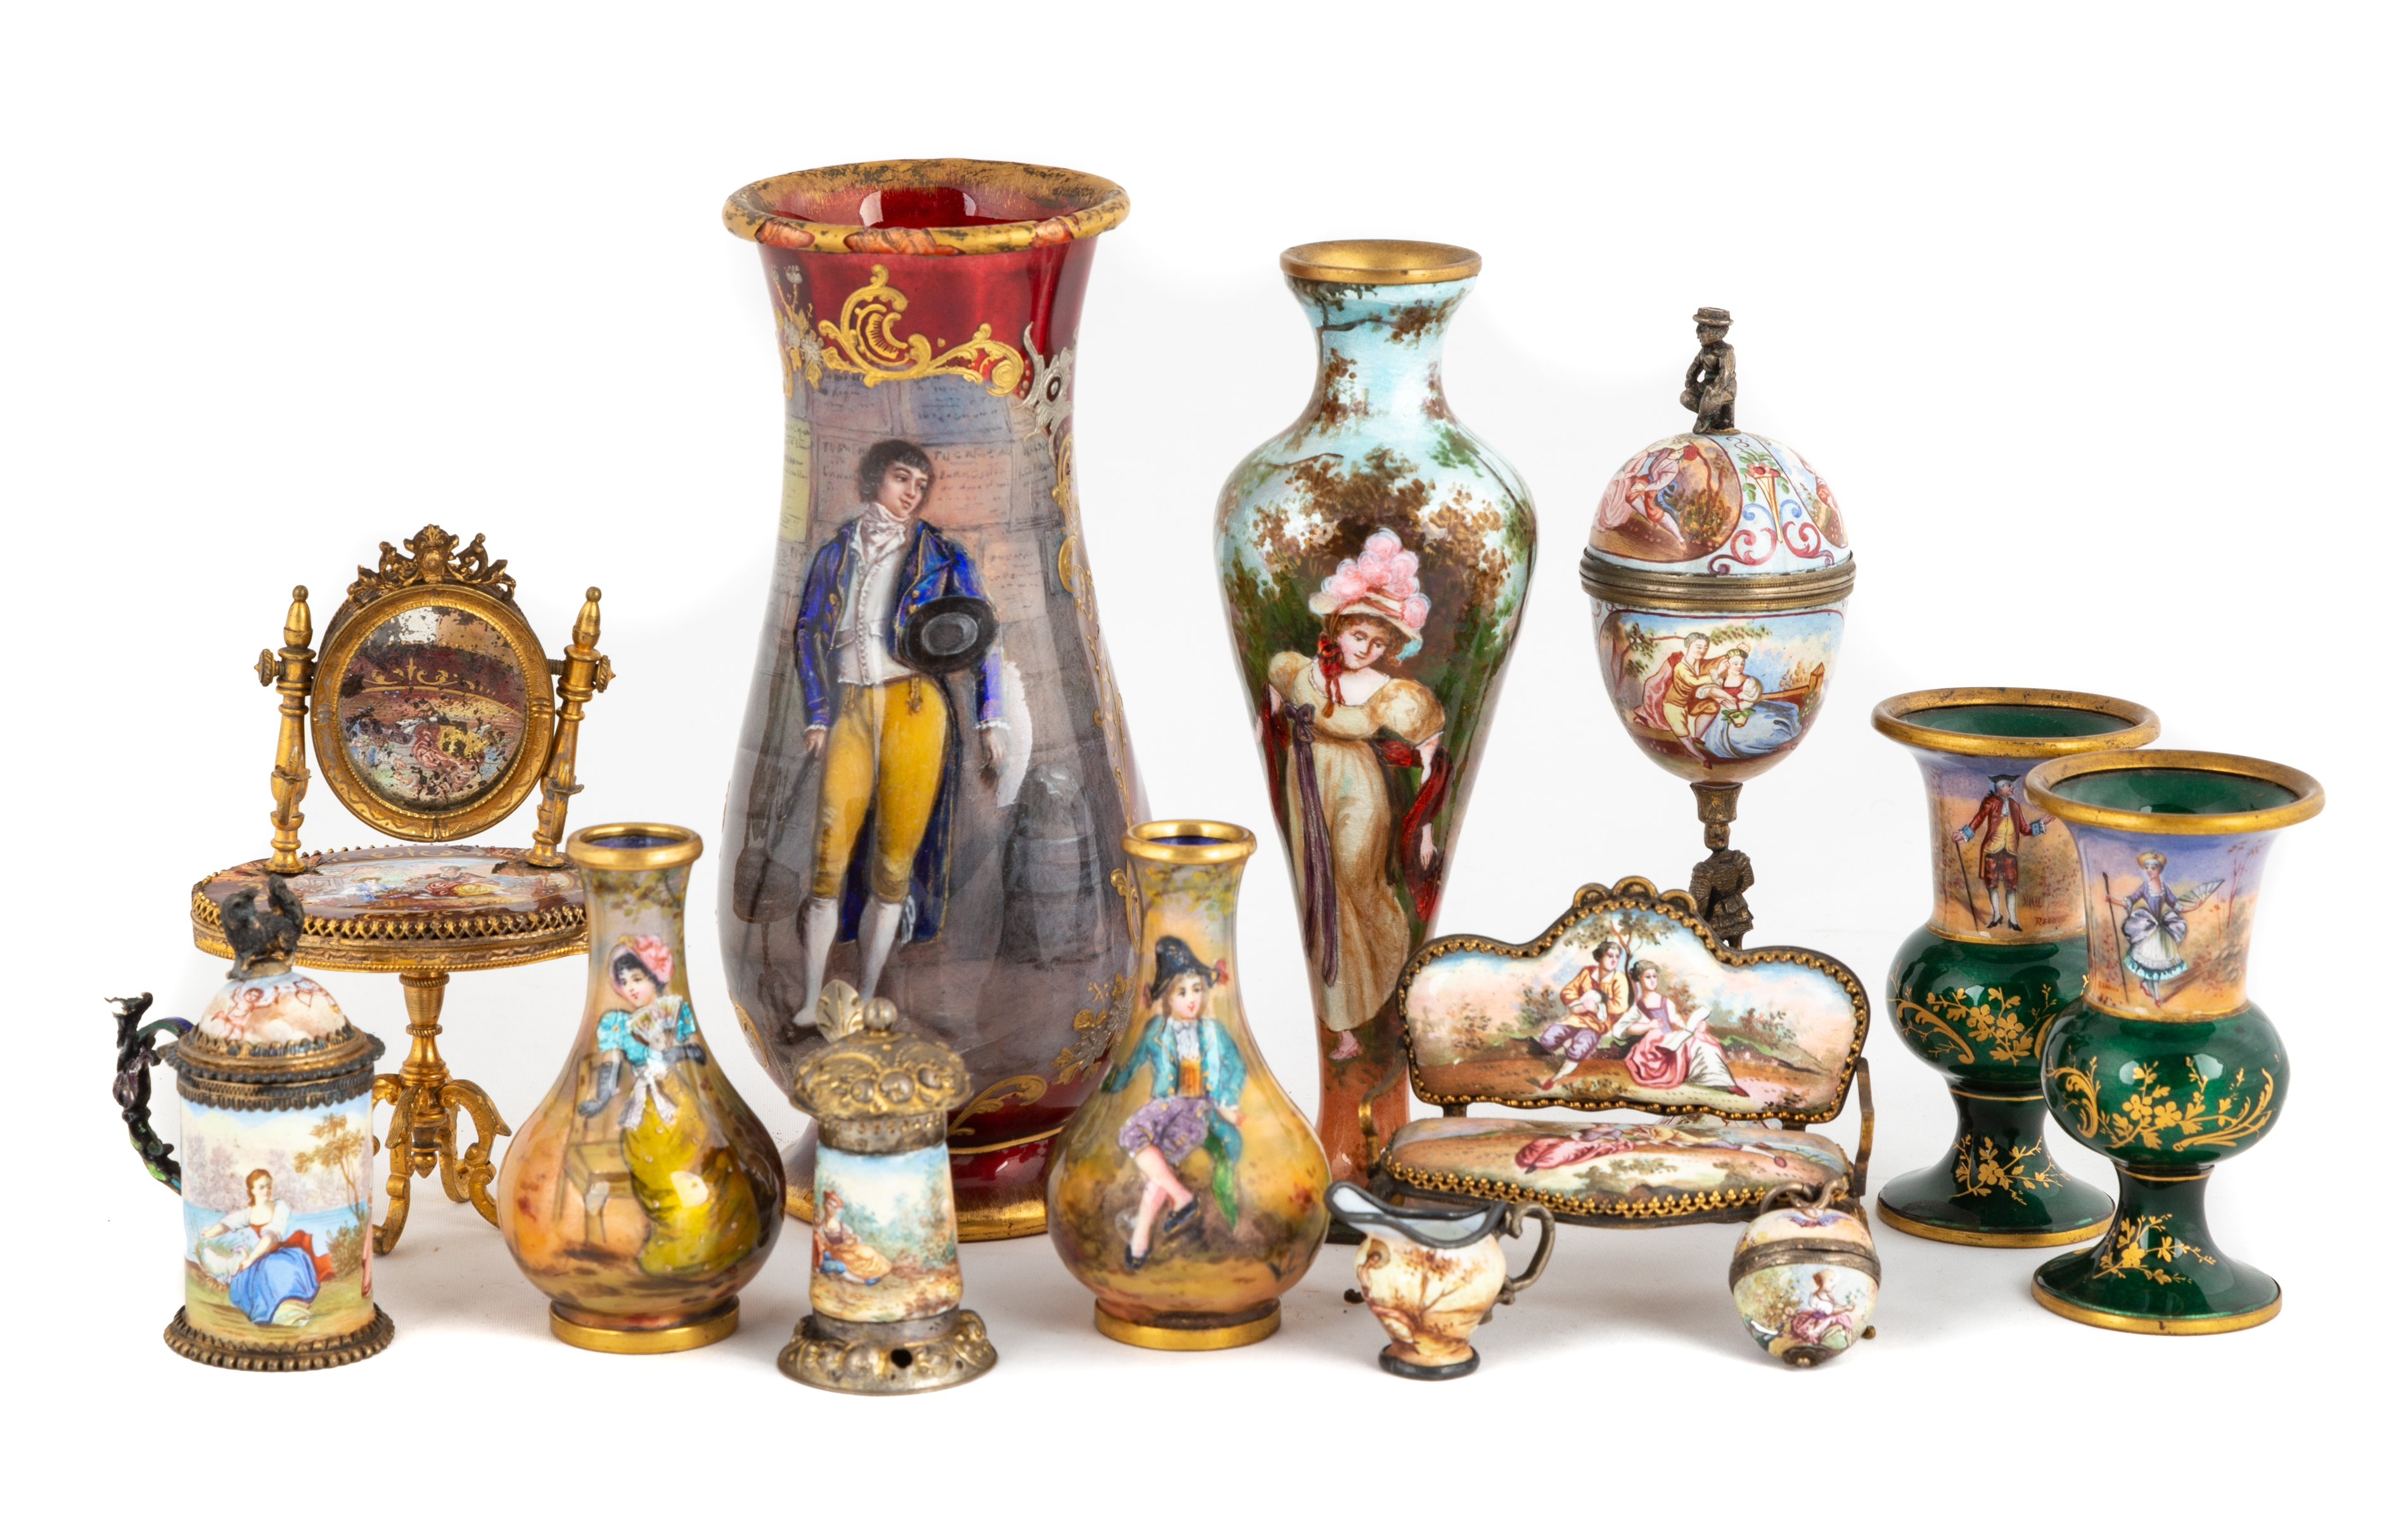 GROUP OF VENETIAN ENAMELED AND